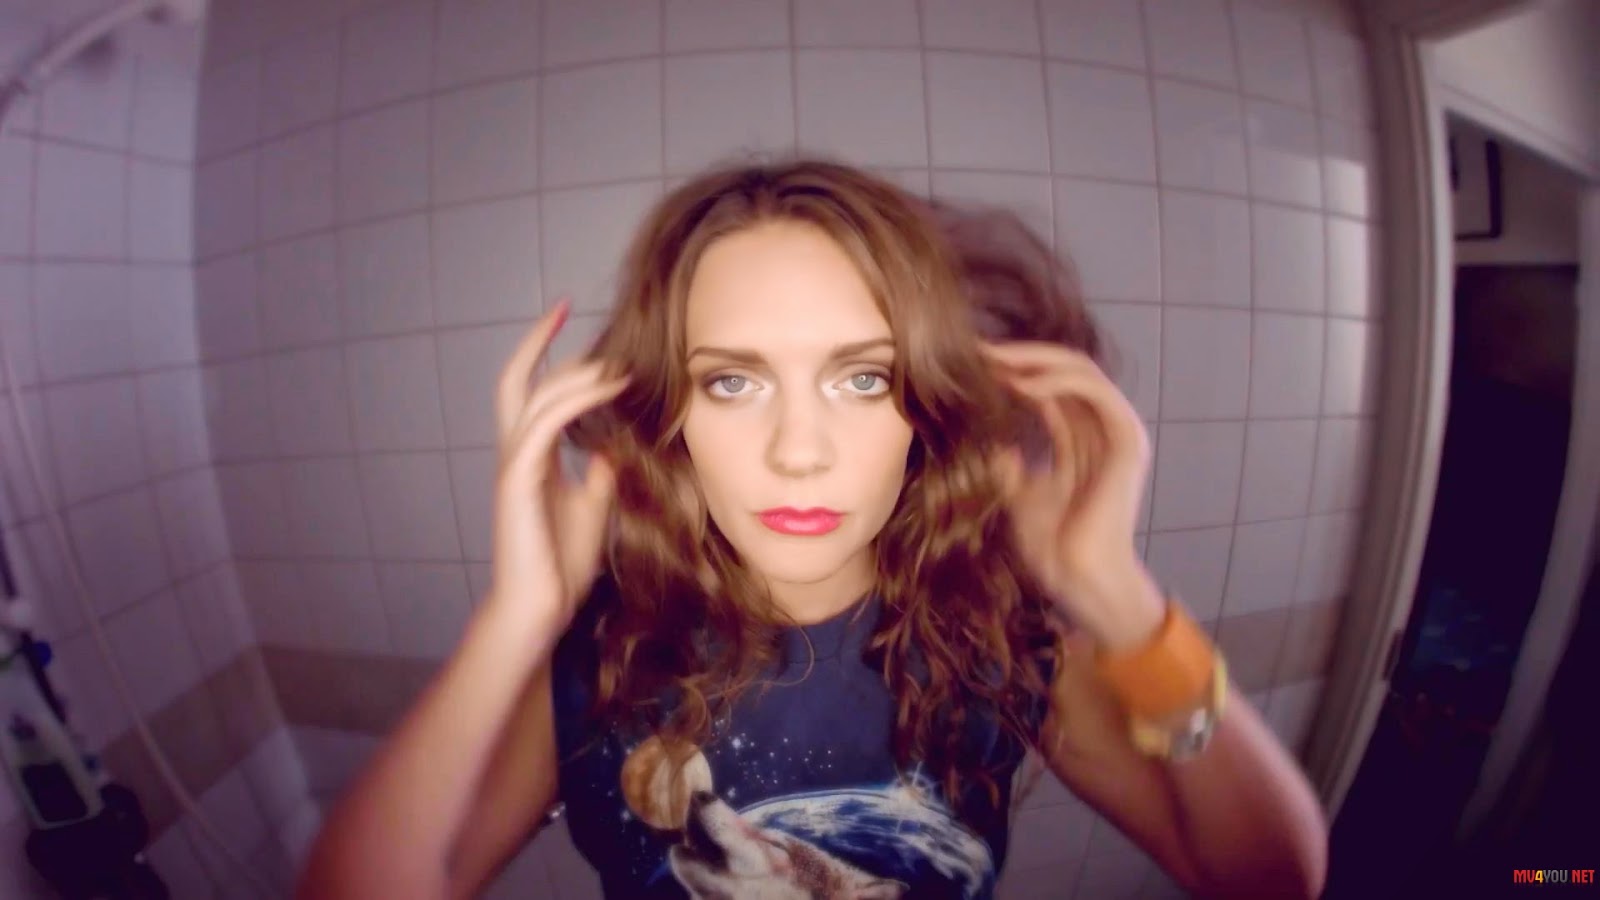 Habits stay high tove. Stay High Туве Лу. Stay High певица. Tove lo Habits. Tove lo stay High.